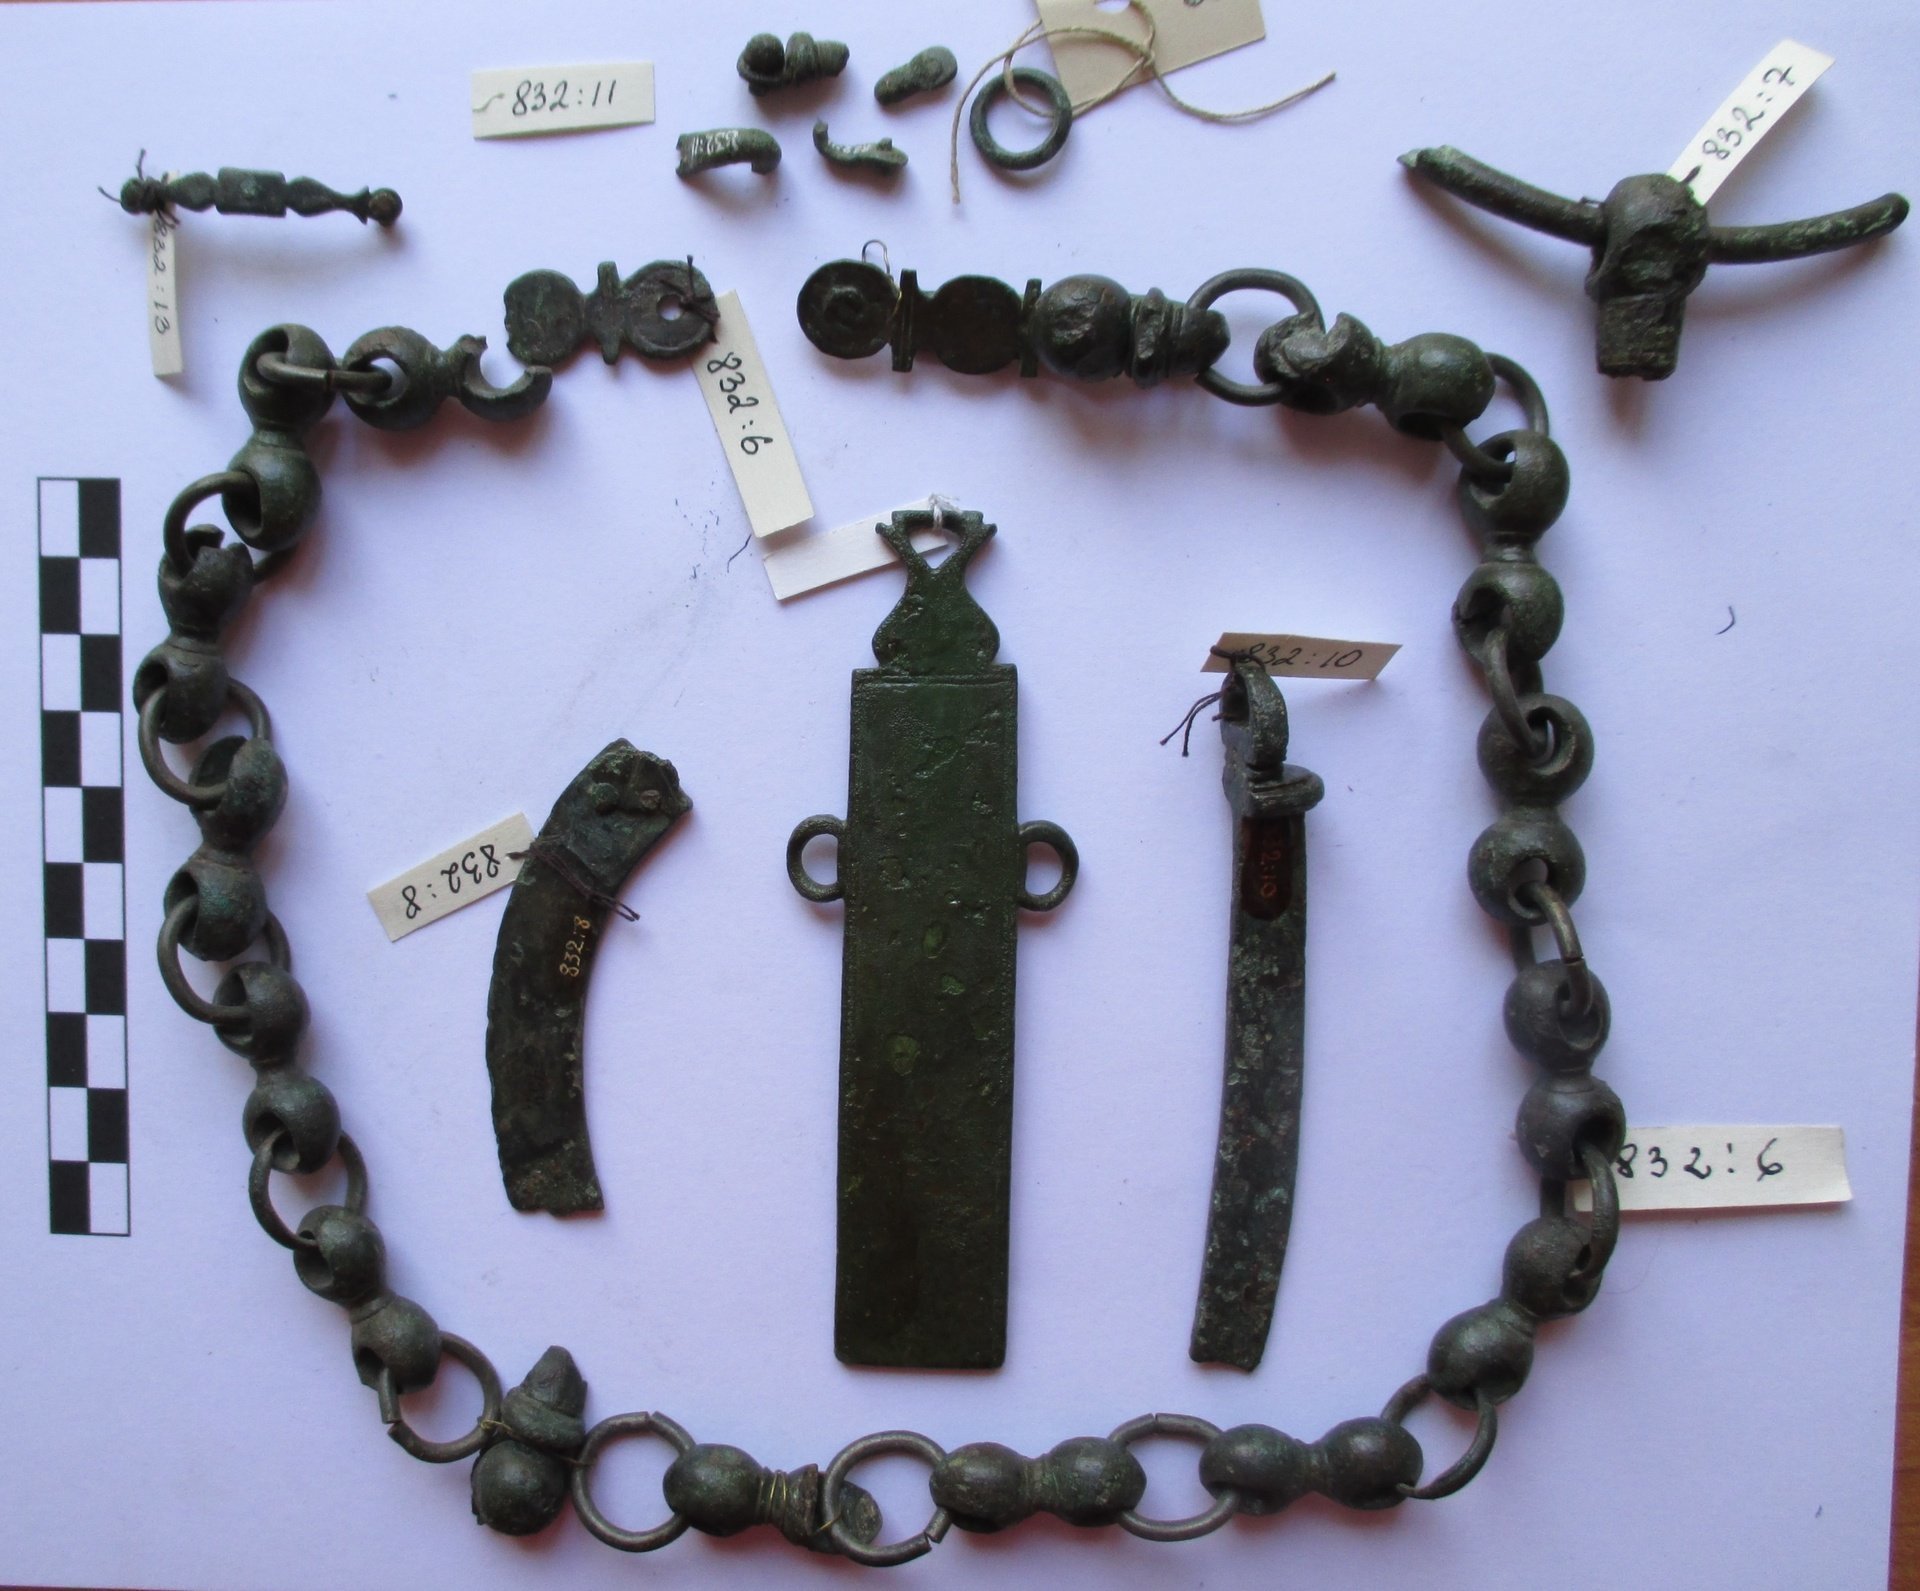 Brass bridle elements from the Nikėlai cemetery (Svėkšna vicinity). The finds are stored at the VDKM in Kaunas (photo by R. Banytė-Rowell).